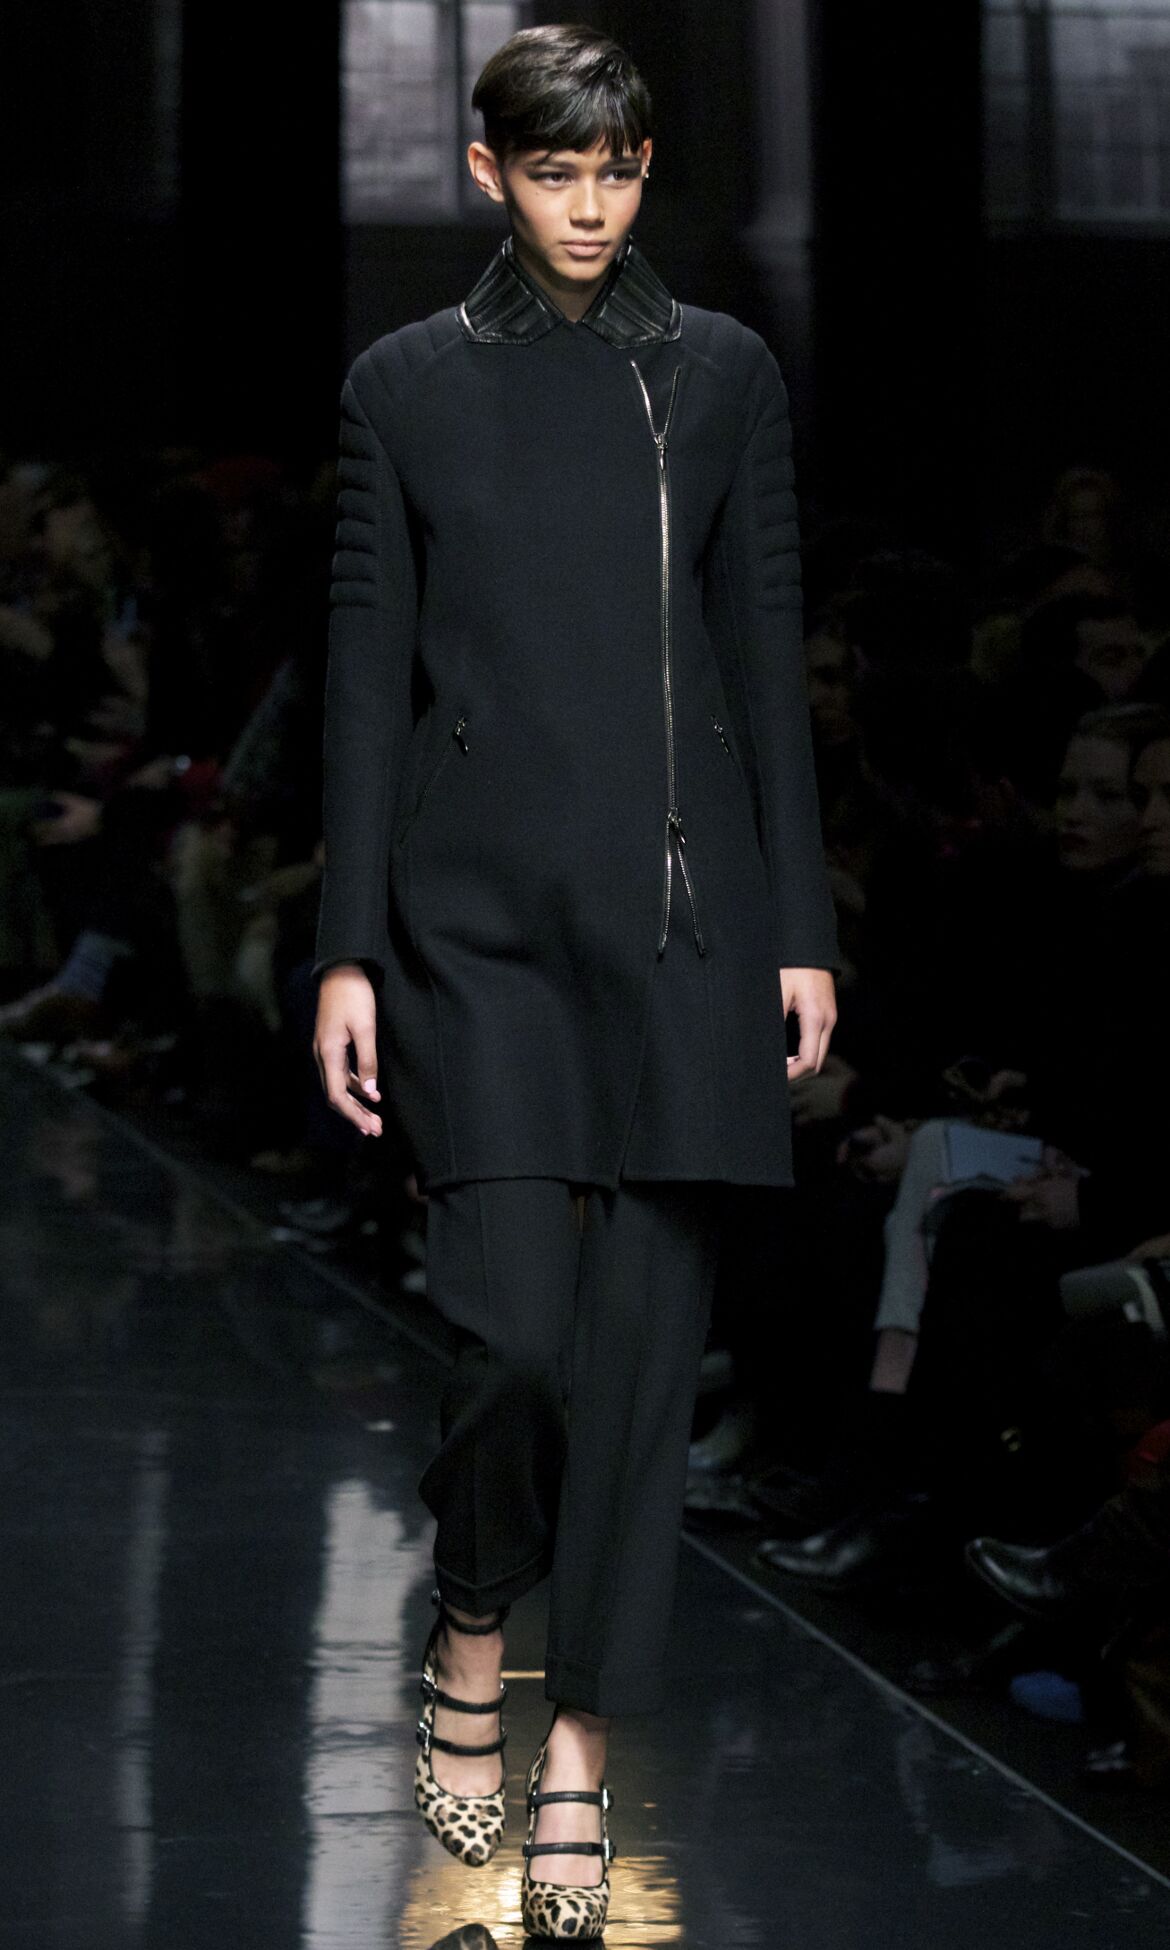 ERMANNO SCERVINO FALL WINTER 2013-14 WOMEN'S COLLECTION | The Skinny Beep